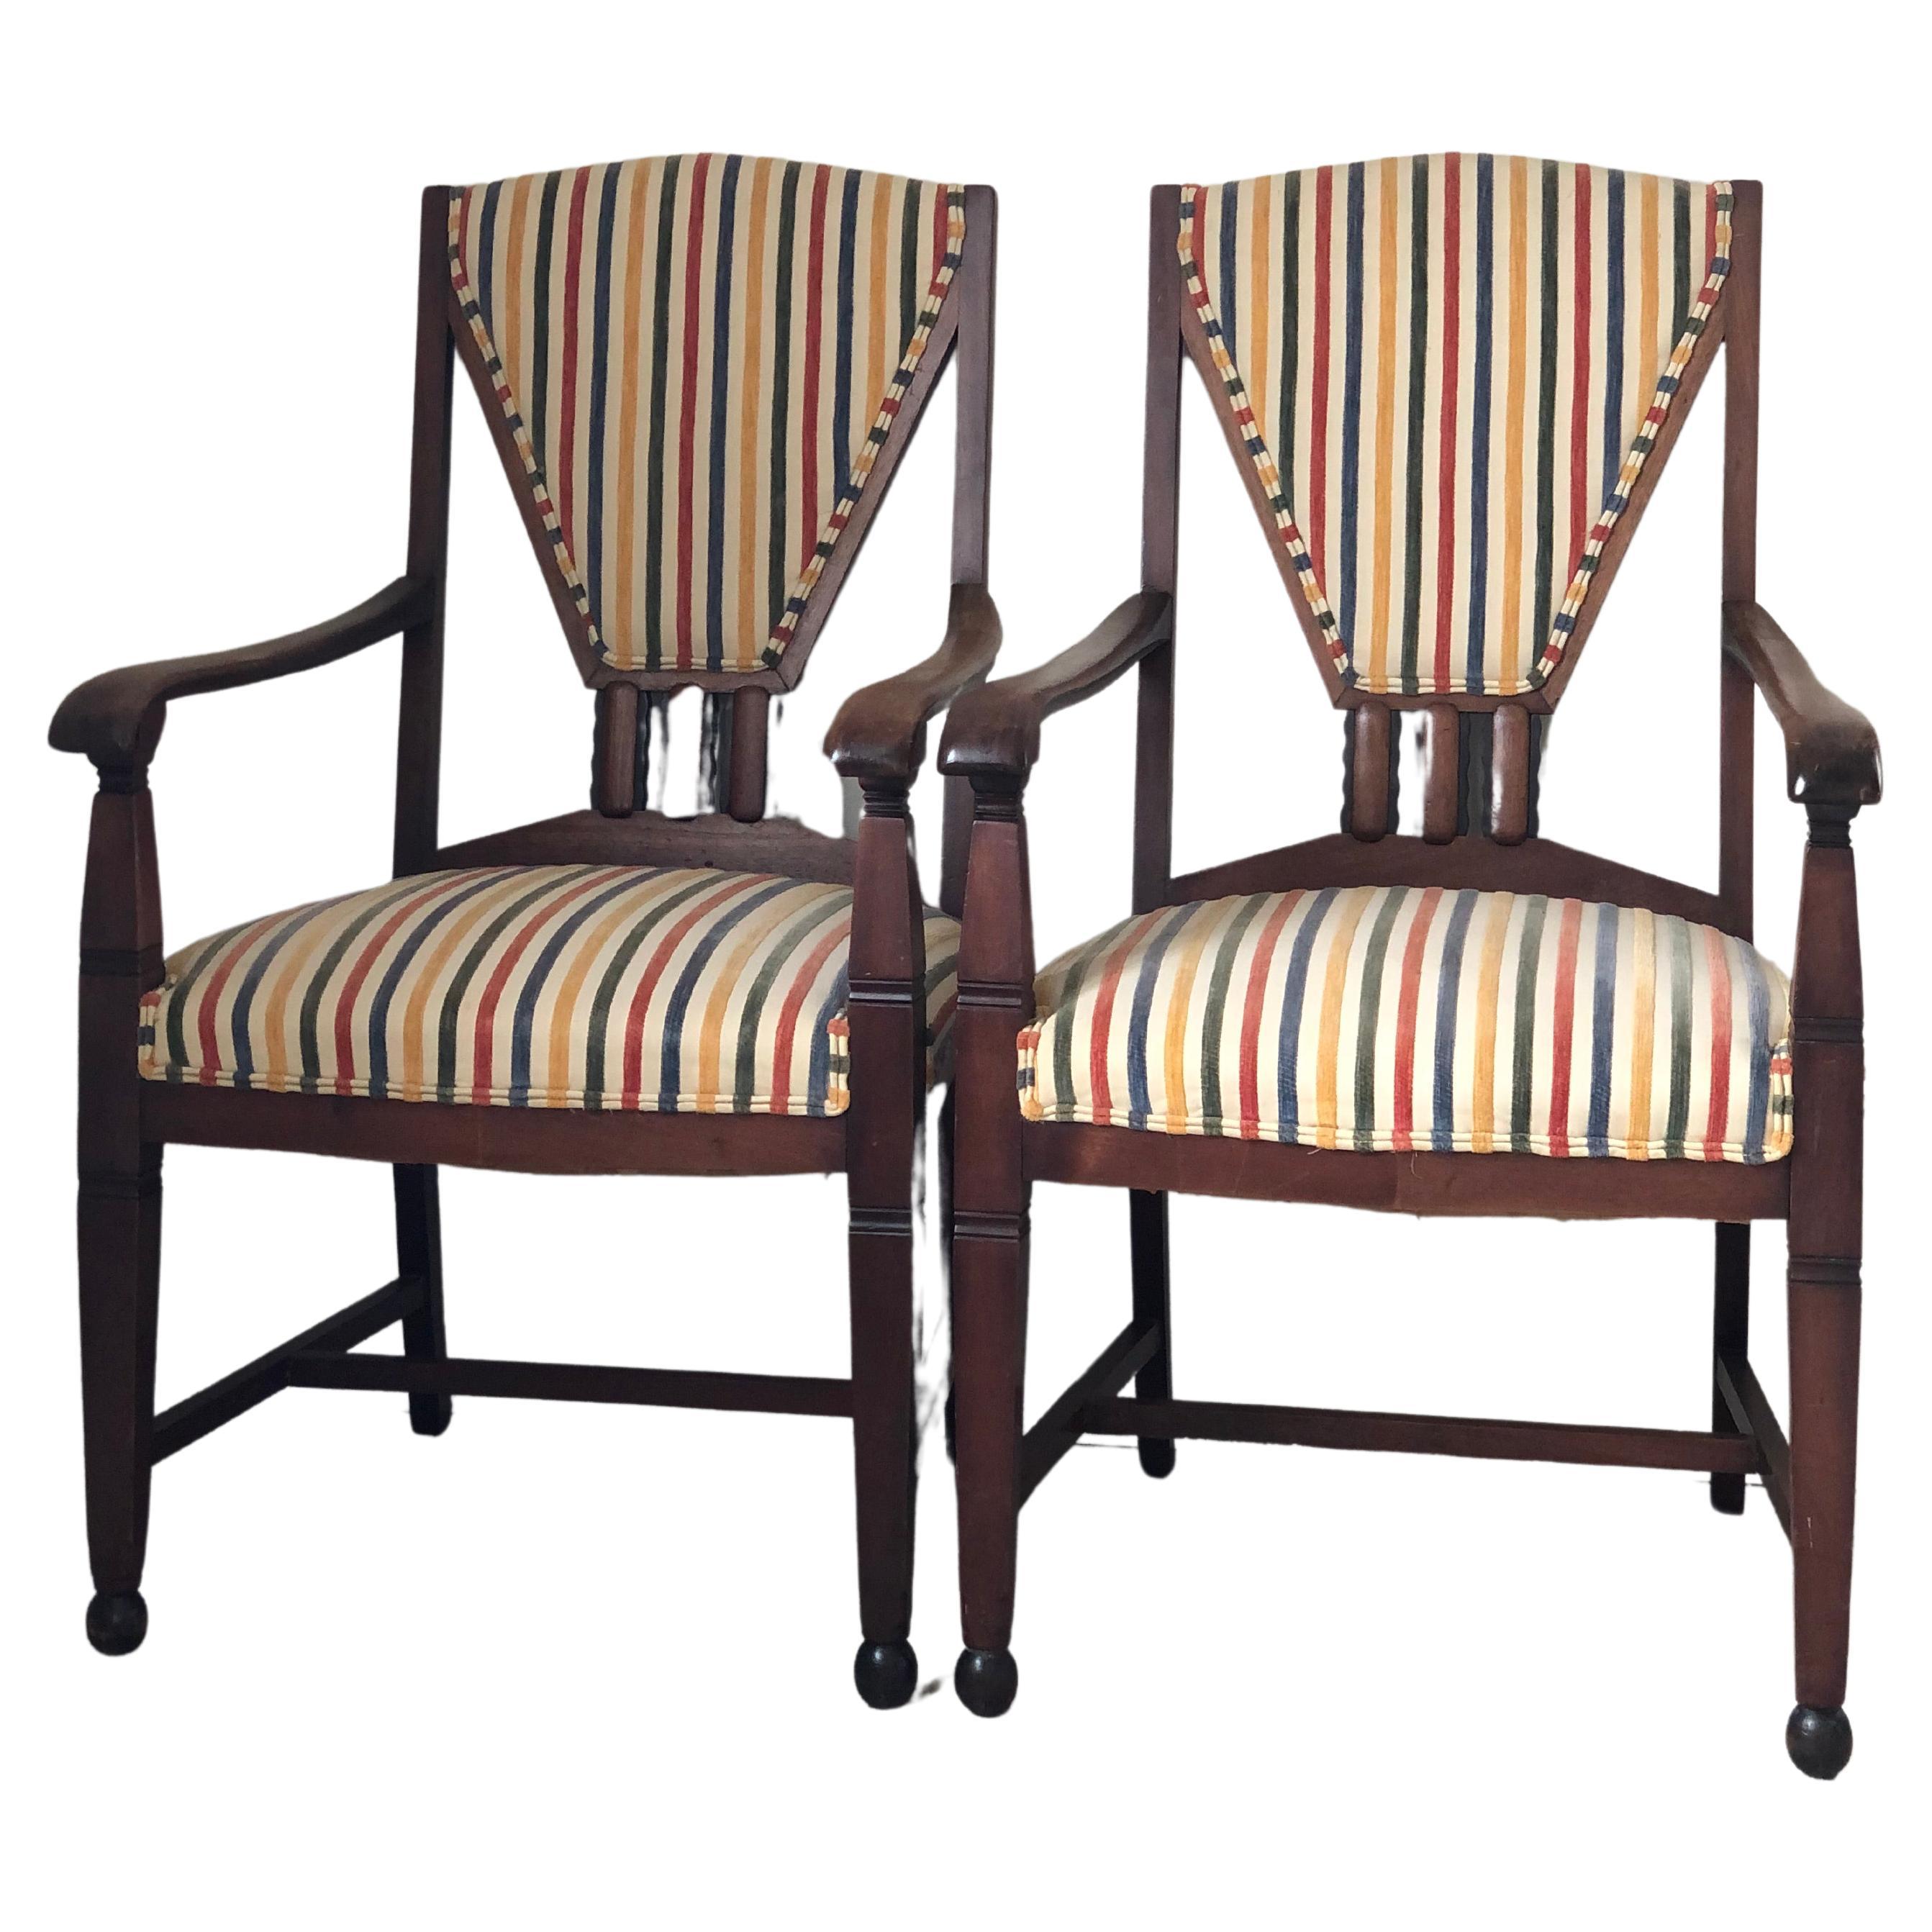 A Pair of 2 Art Deco Amsterdam School ‘t Woonhuys Armchairs The Netherlands 